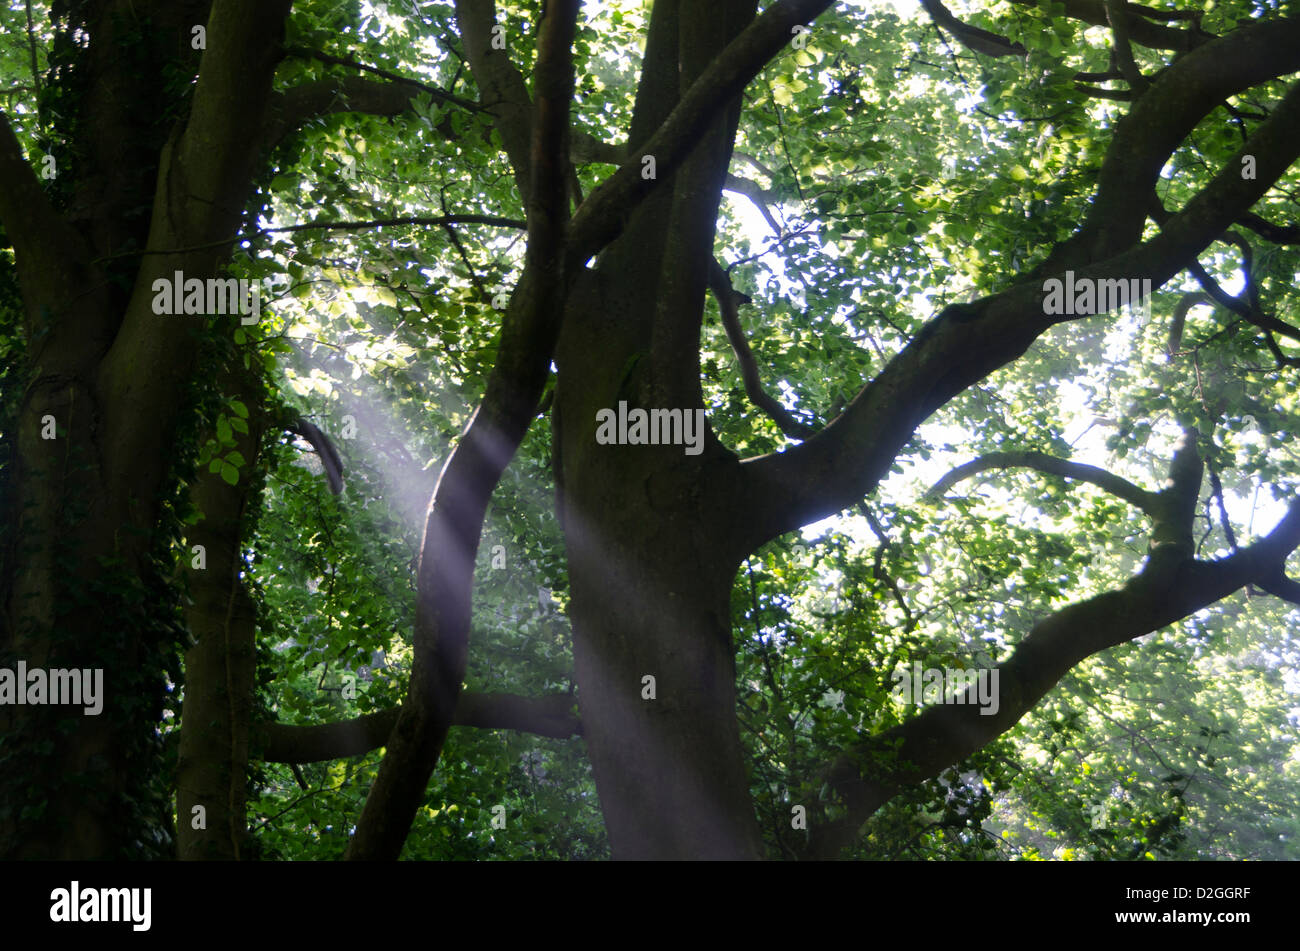 Sun's rays shining through trees, near Wych Cross, Forest Row, Ashdown Forest, Sussex, England Stock Photo